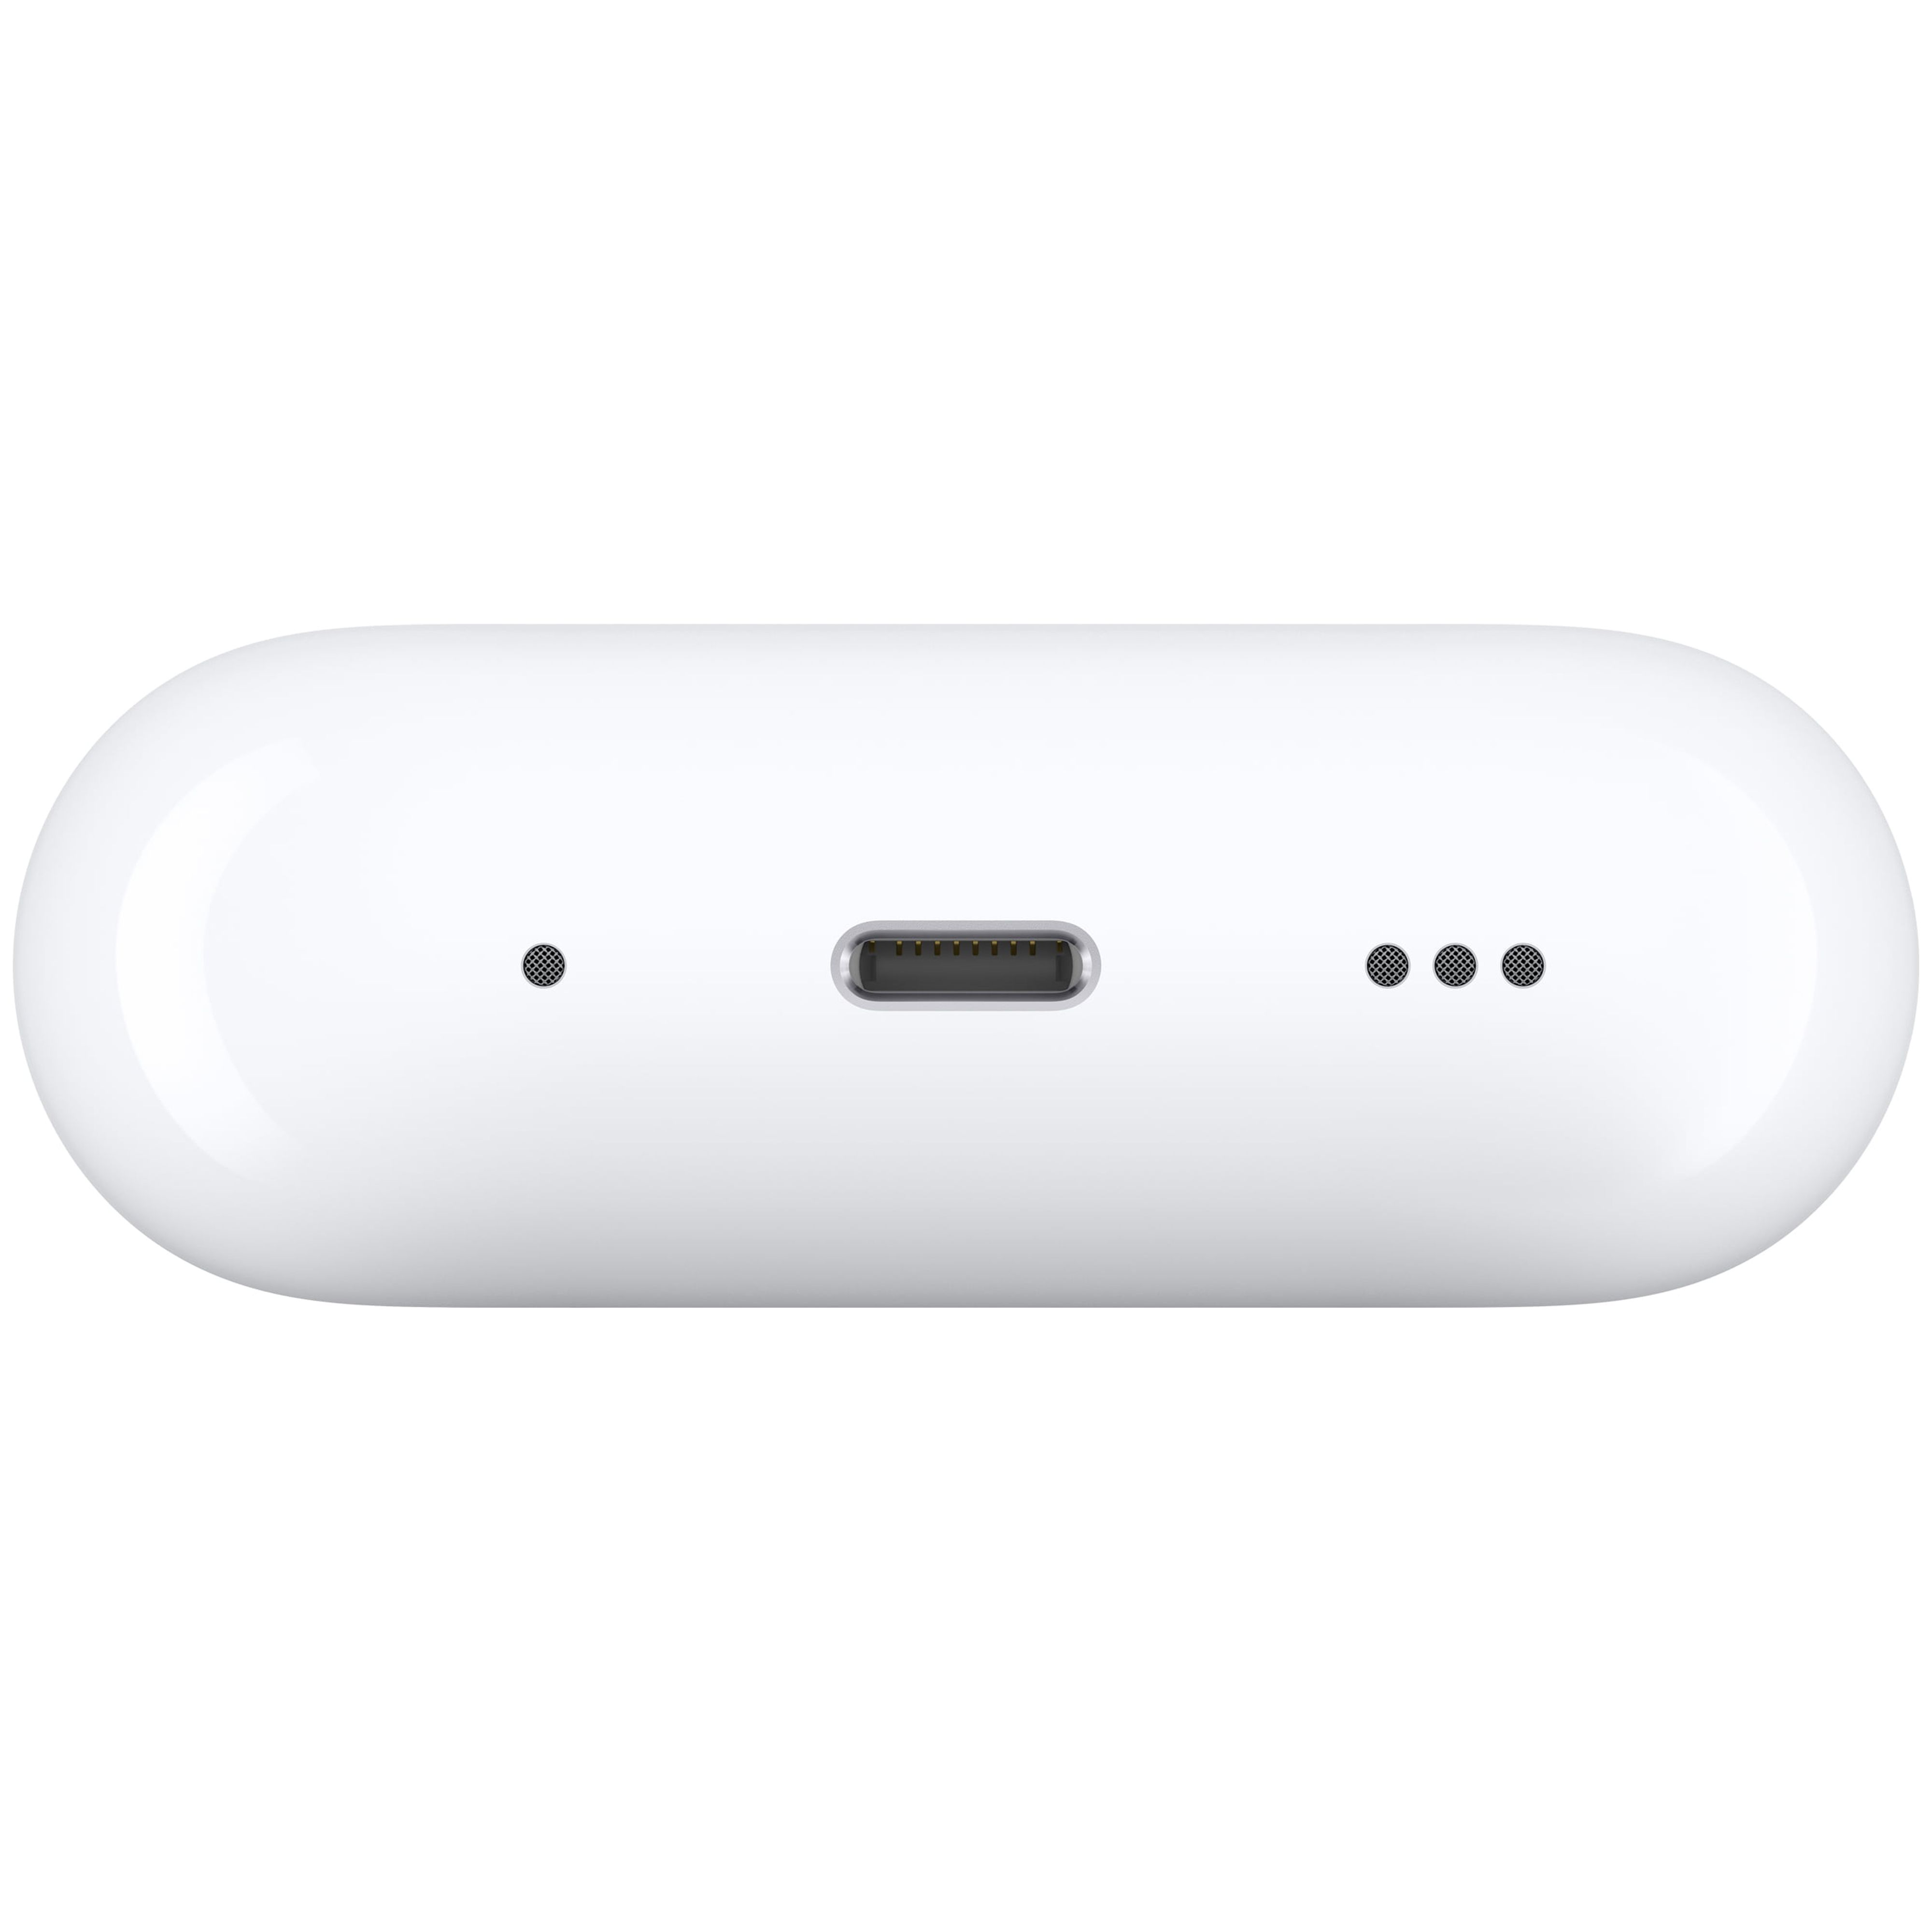 Apple AirPods Pro (2nd Generation) - Lightning - image 5 of 5